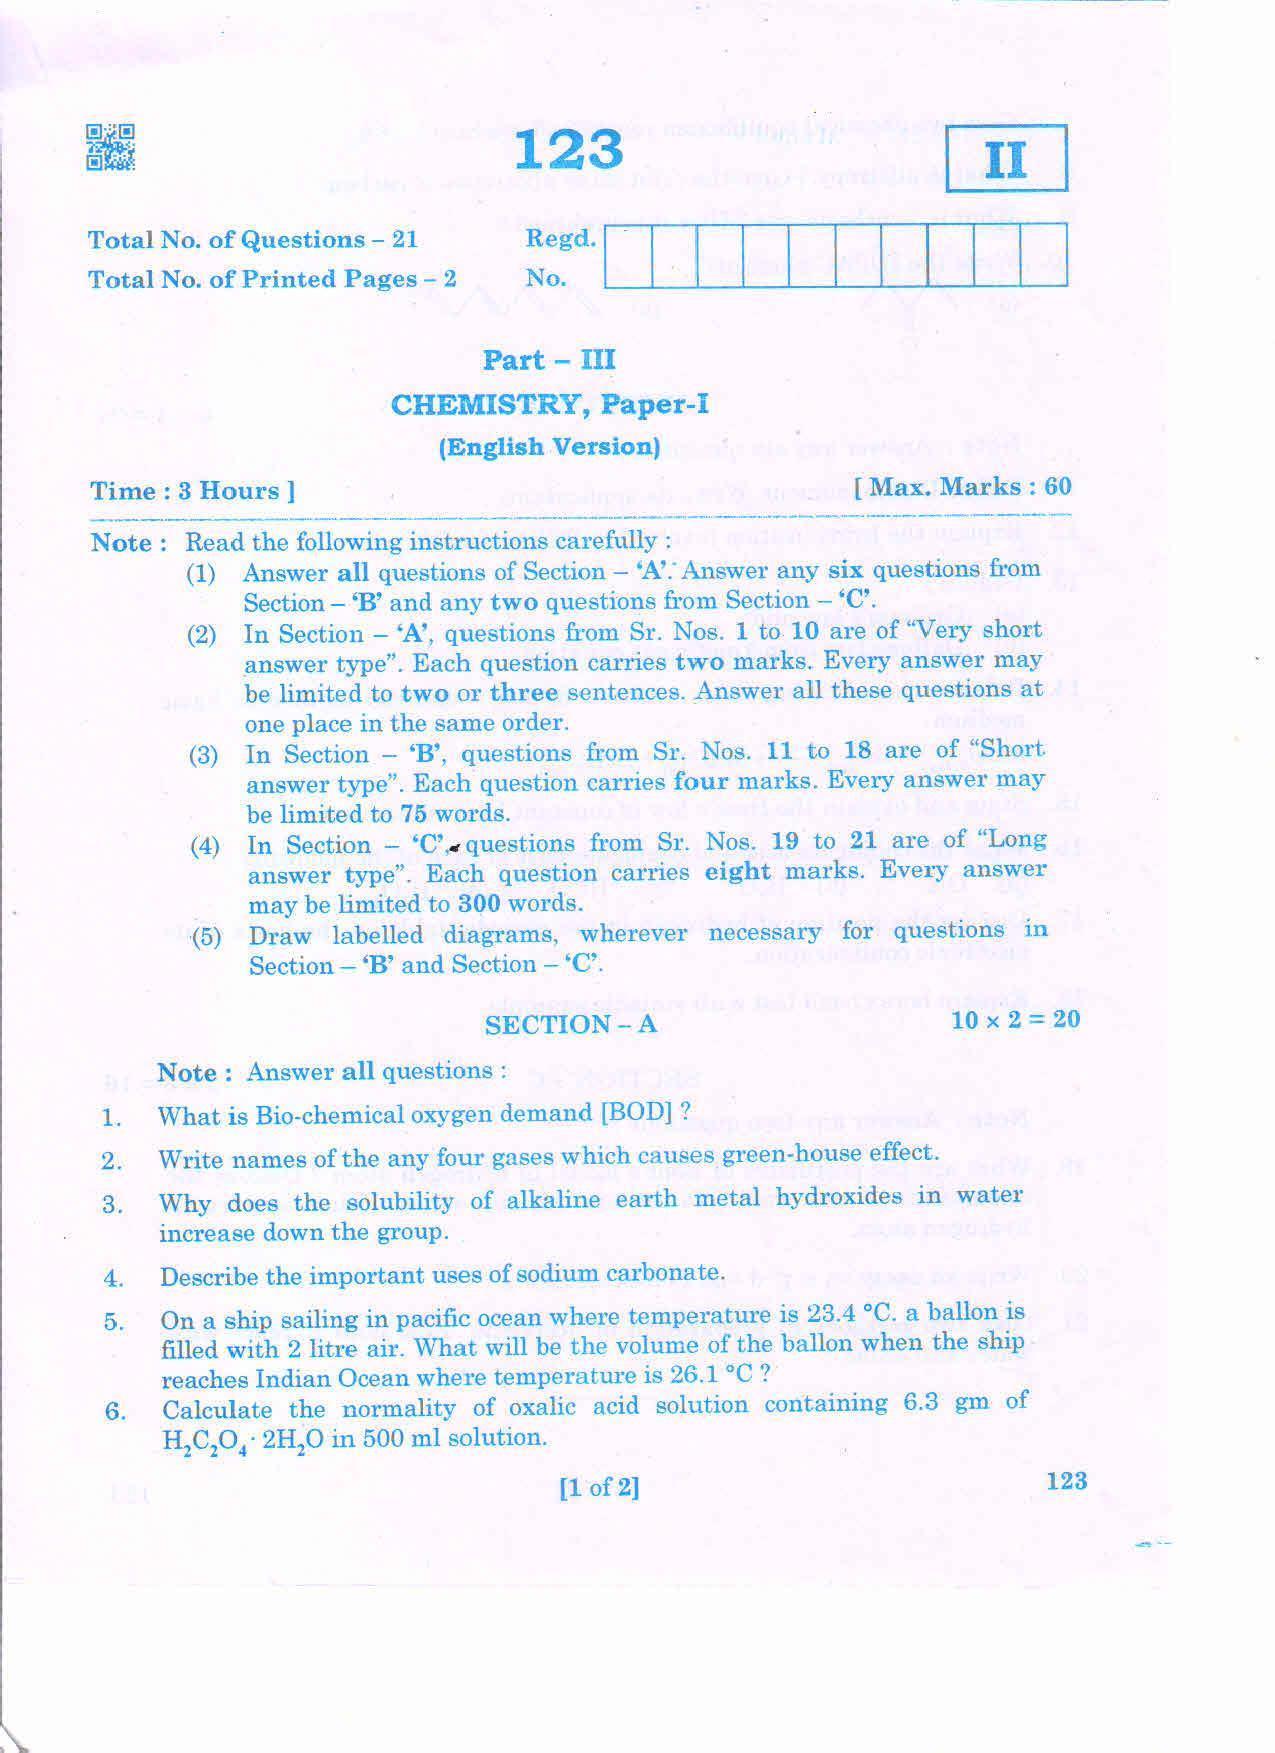 AP 2nd Year General Question Paper March - 2020 - CHEMISTRY-I (EM) - Page 1